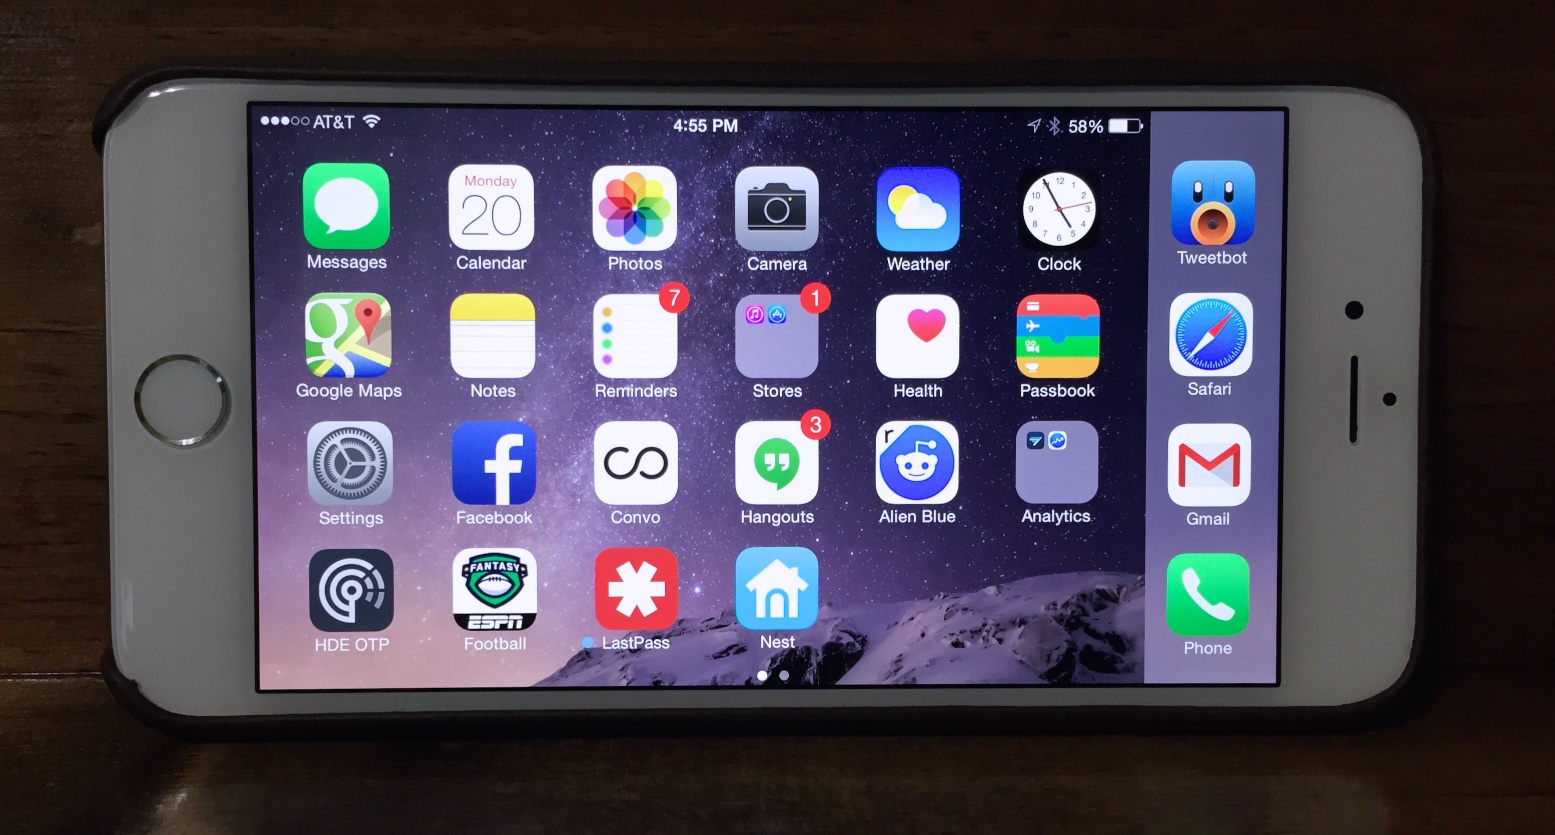 Here's whats new in the iOS 8.1 release.